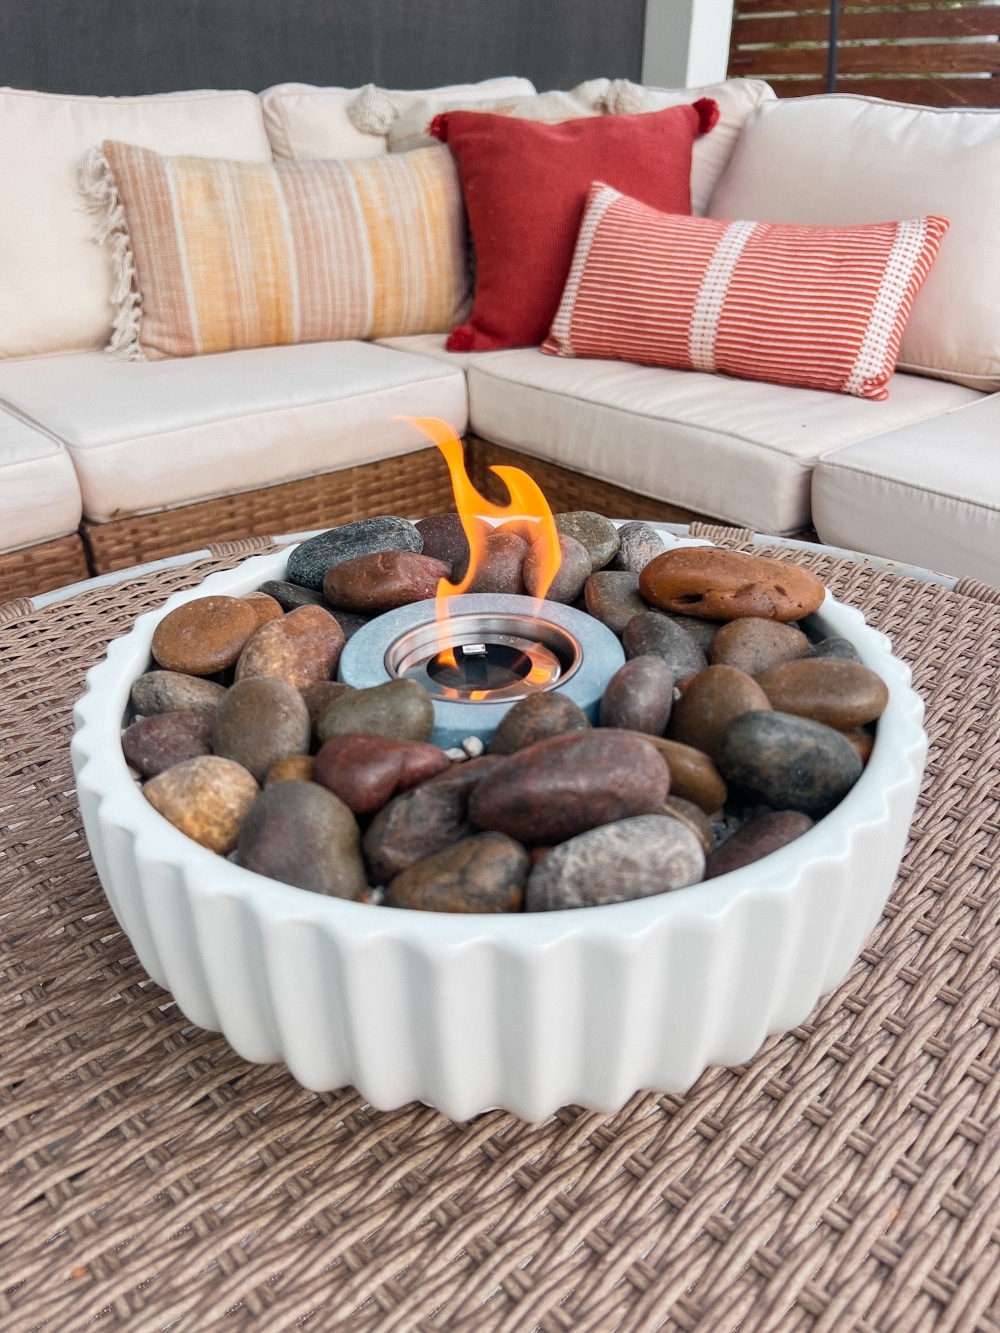 How to Make a Tabletop Fire Bowl. Make a tabletop fire bowl with a ceramic planter, rocks, and a concrete center, fueled by rubbing alcohol or tiki torch fuel, for indoor or outdoor ambiance.